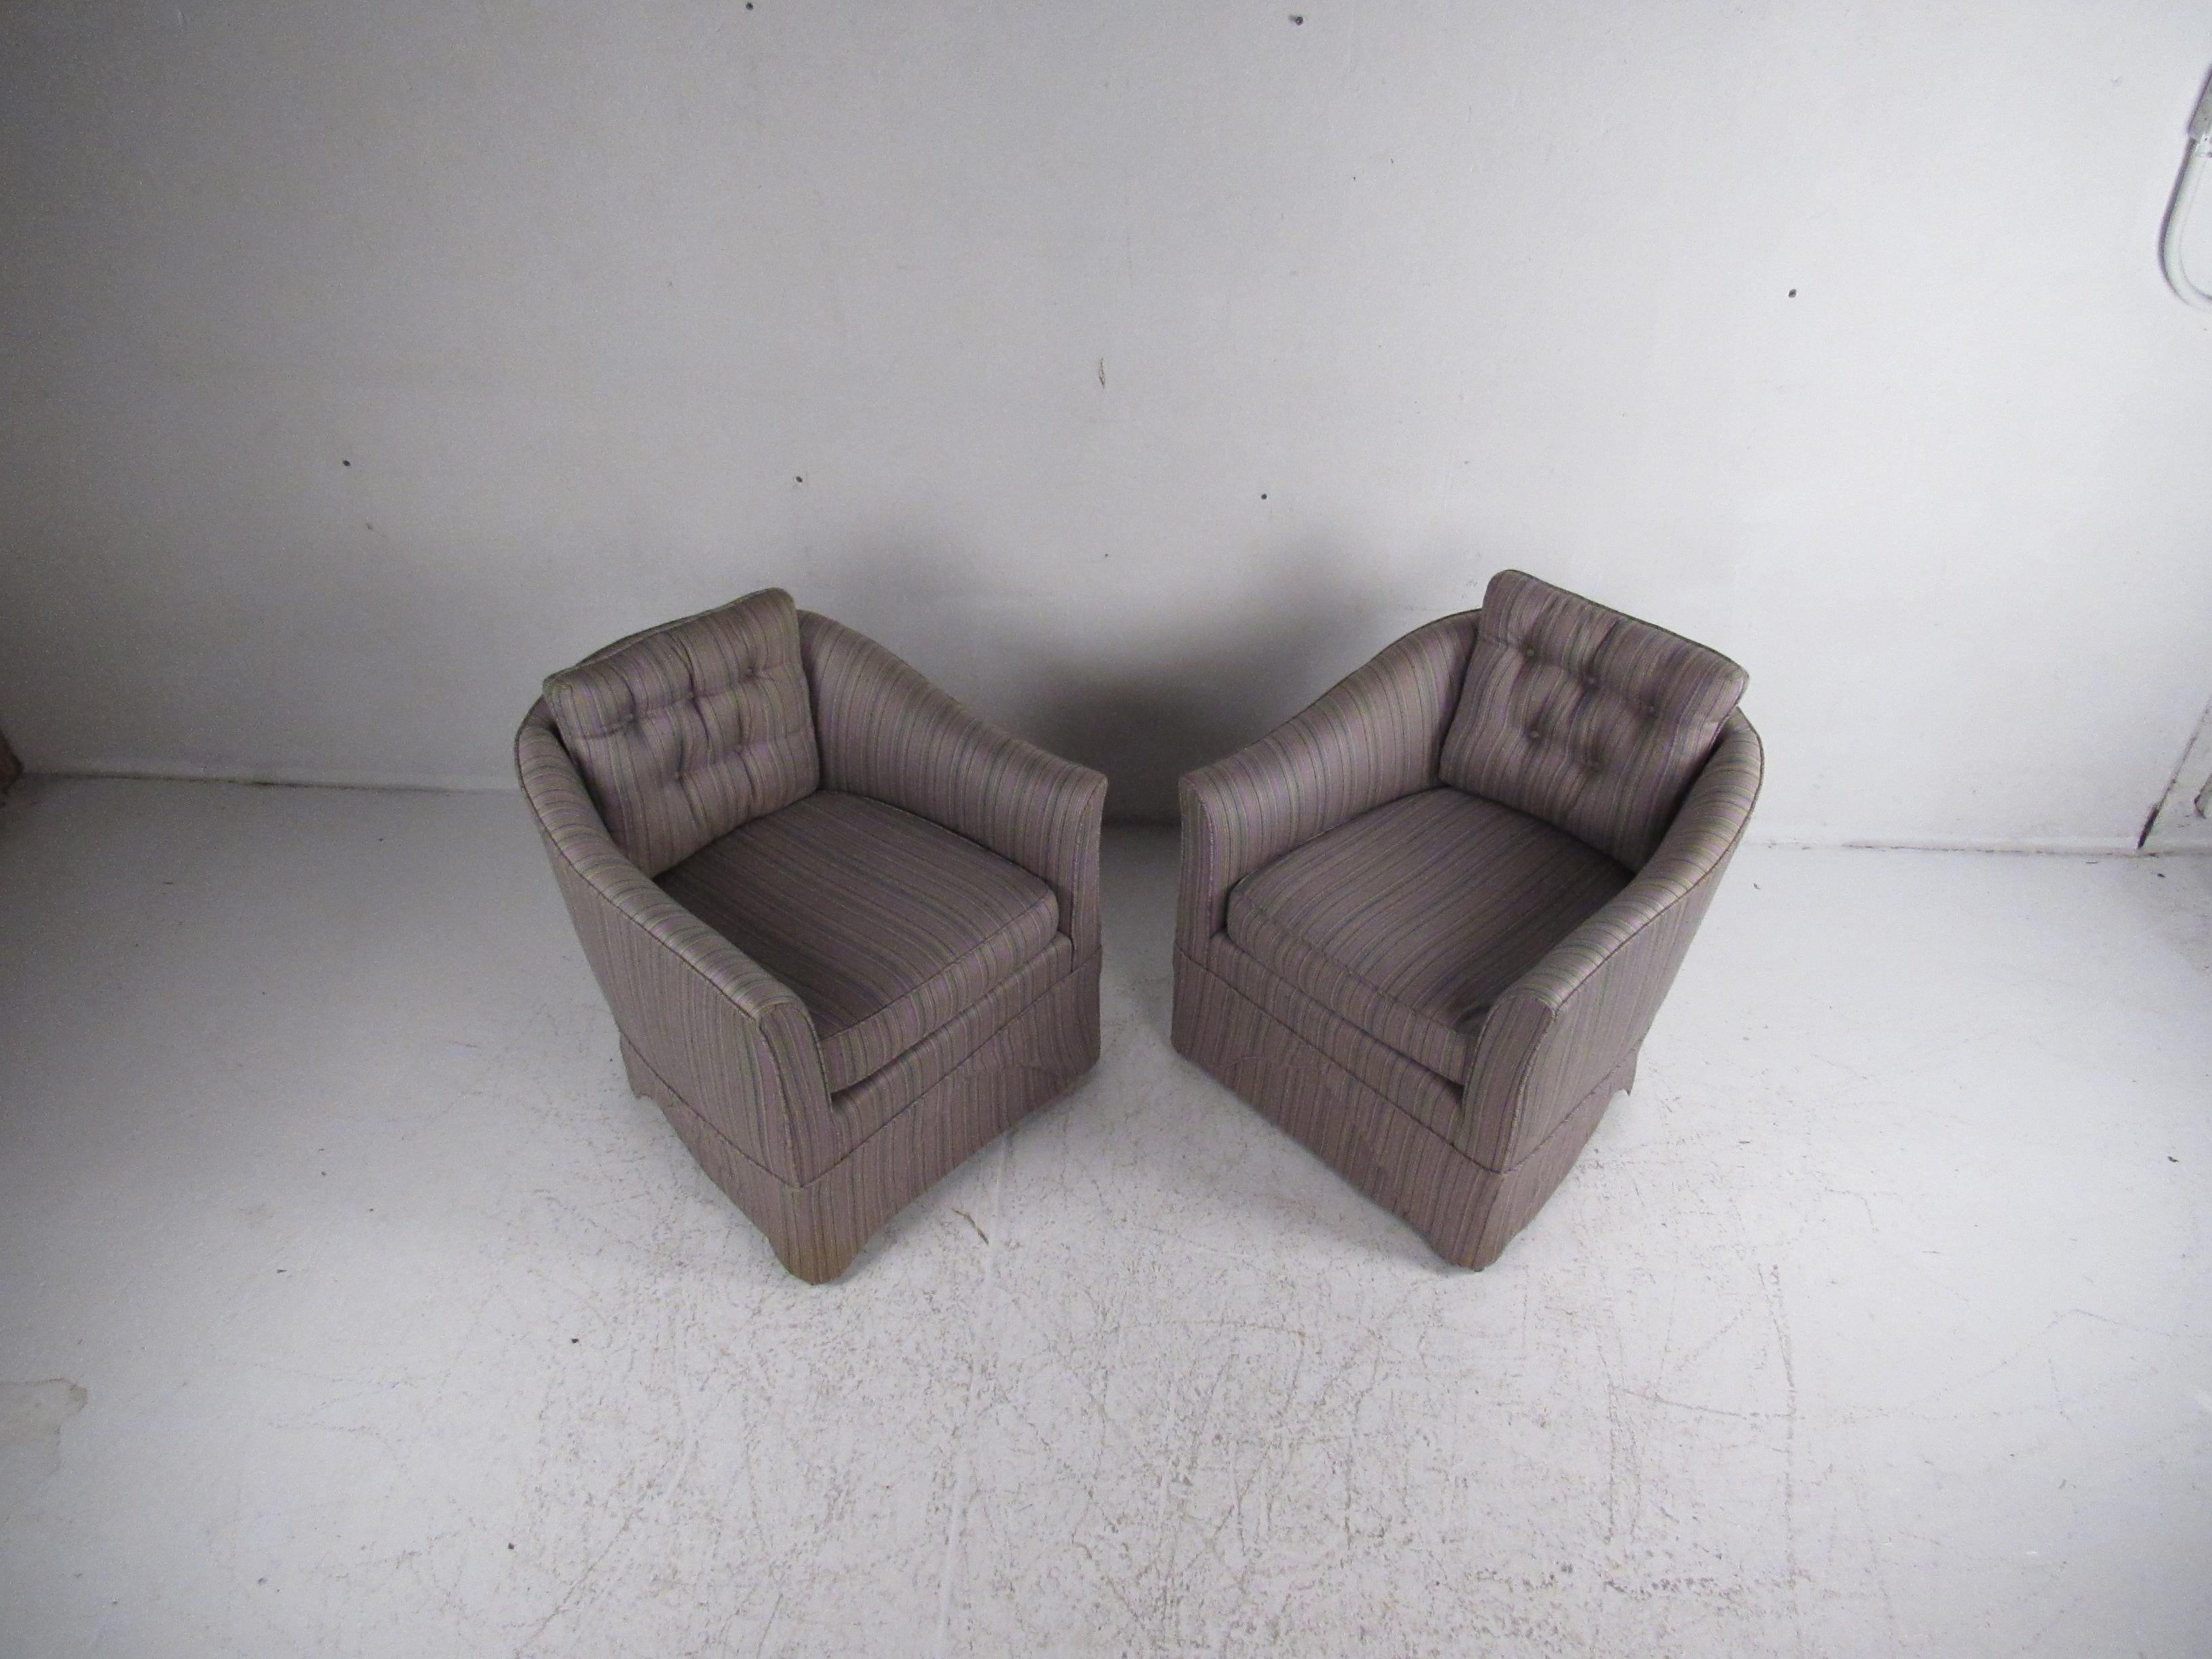 This gorgeous pair of vintage modern lounge chairs feature two overstuffed removable cushions and plush upholstery. A unique draping fabric along the base and curved arm rests add to the allure. This stylish pair with tufted backrests sit on top of